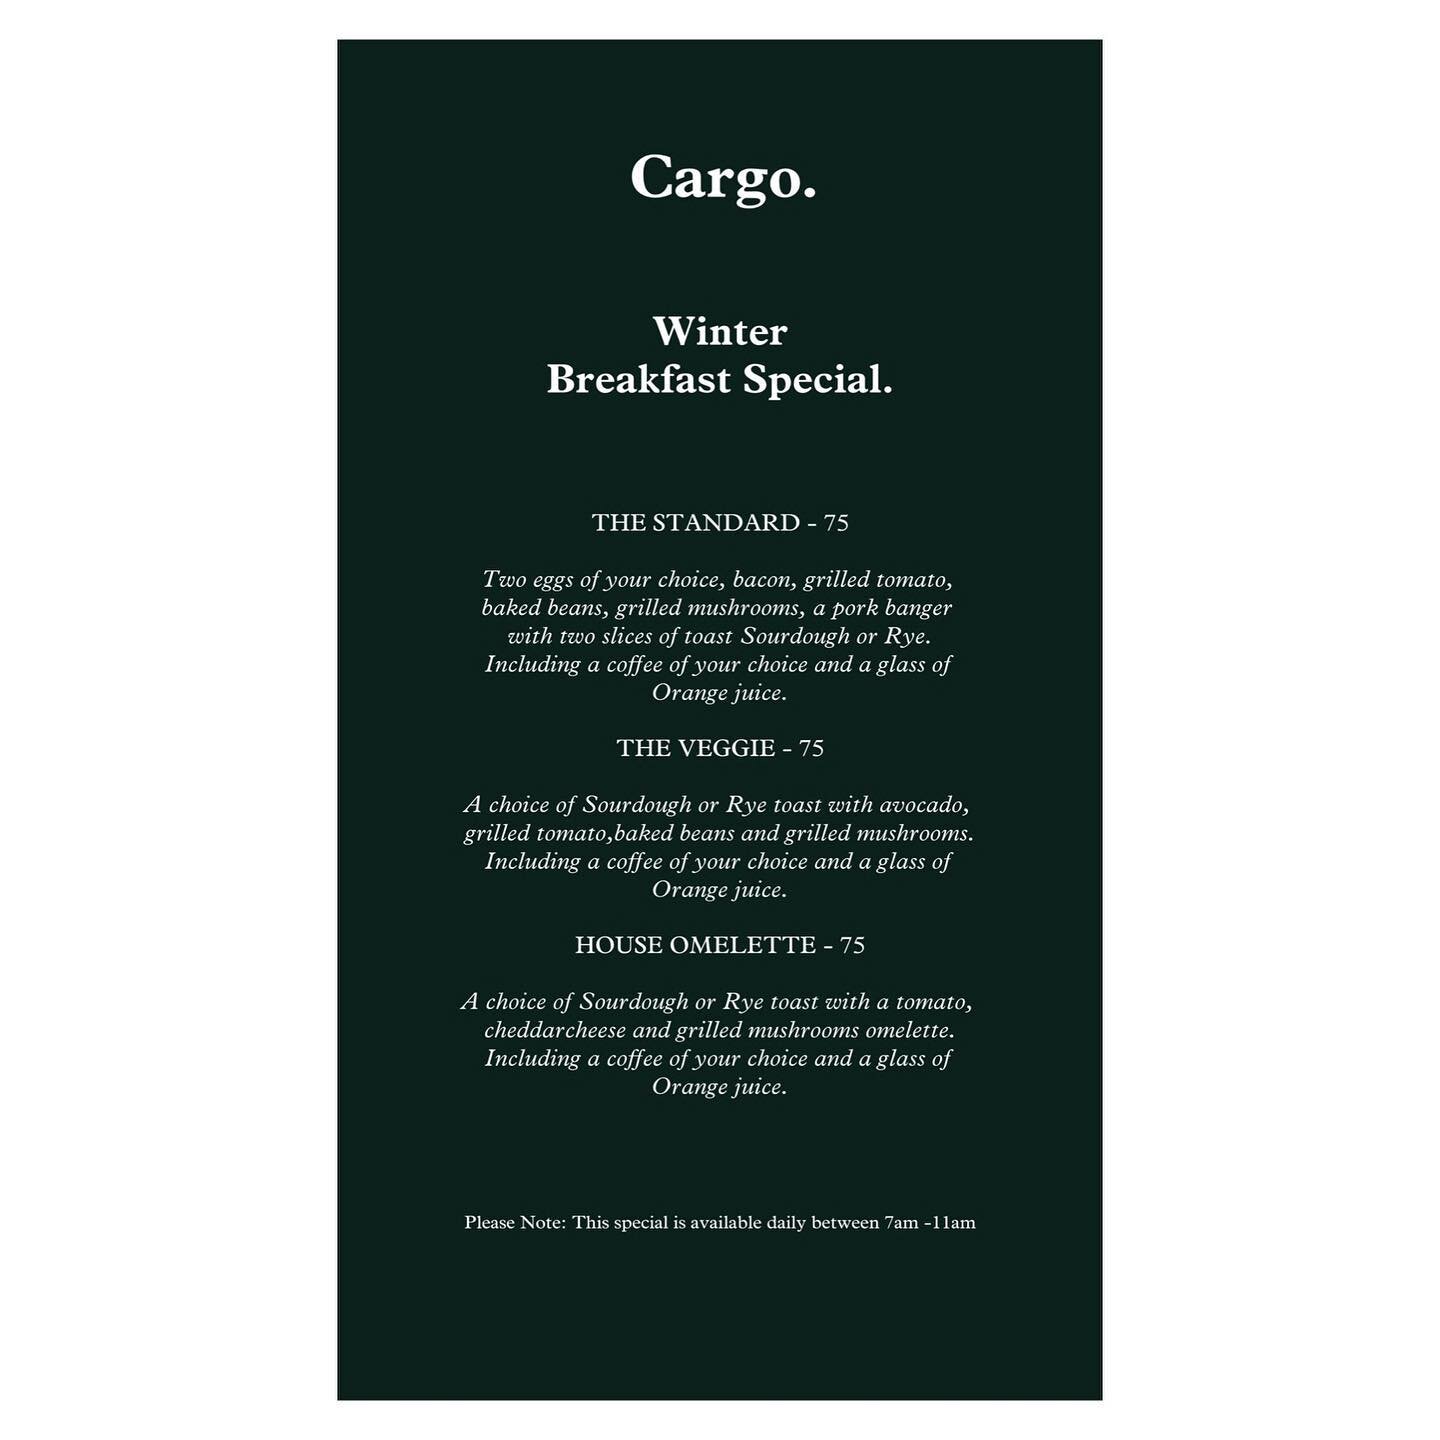 It&rsquo;s basically for free! Come join us for our Winter Breakfast Special at Cargo.

@c__a__r__g__o #cargo #restaurant #bar #capetown #southafrica #cafe @all.yours.co